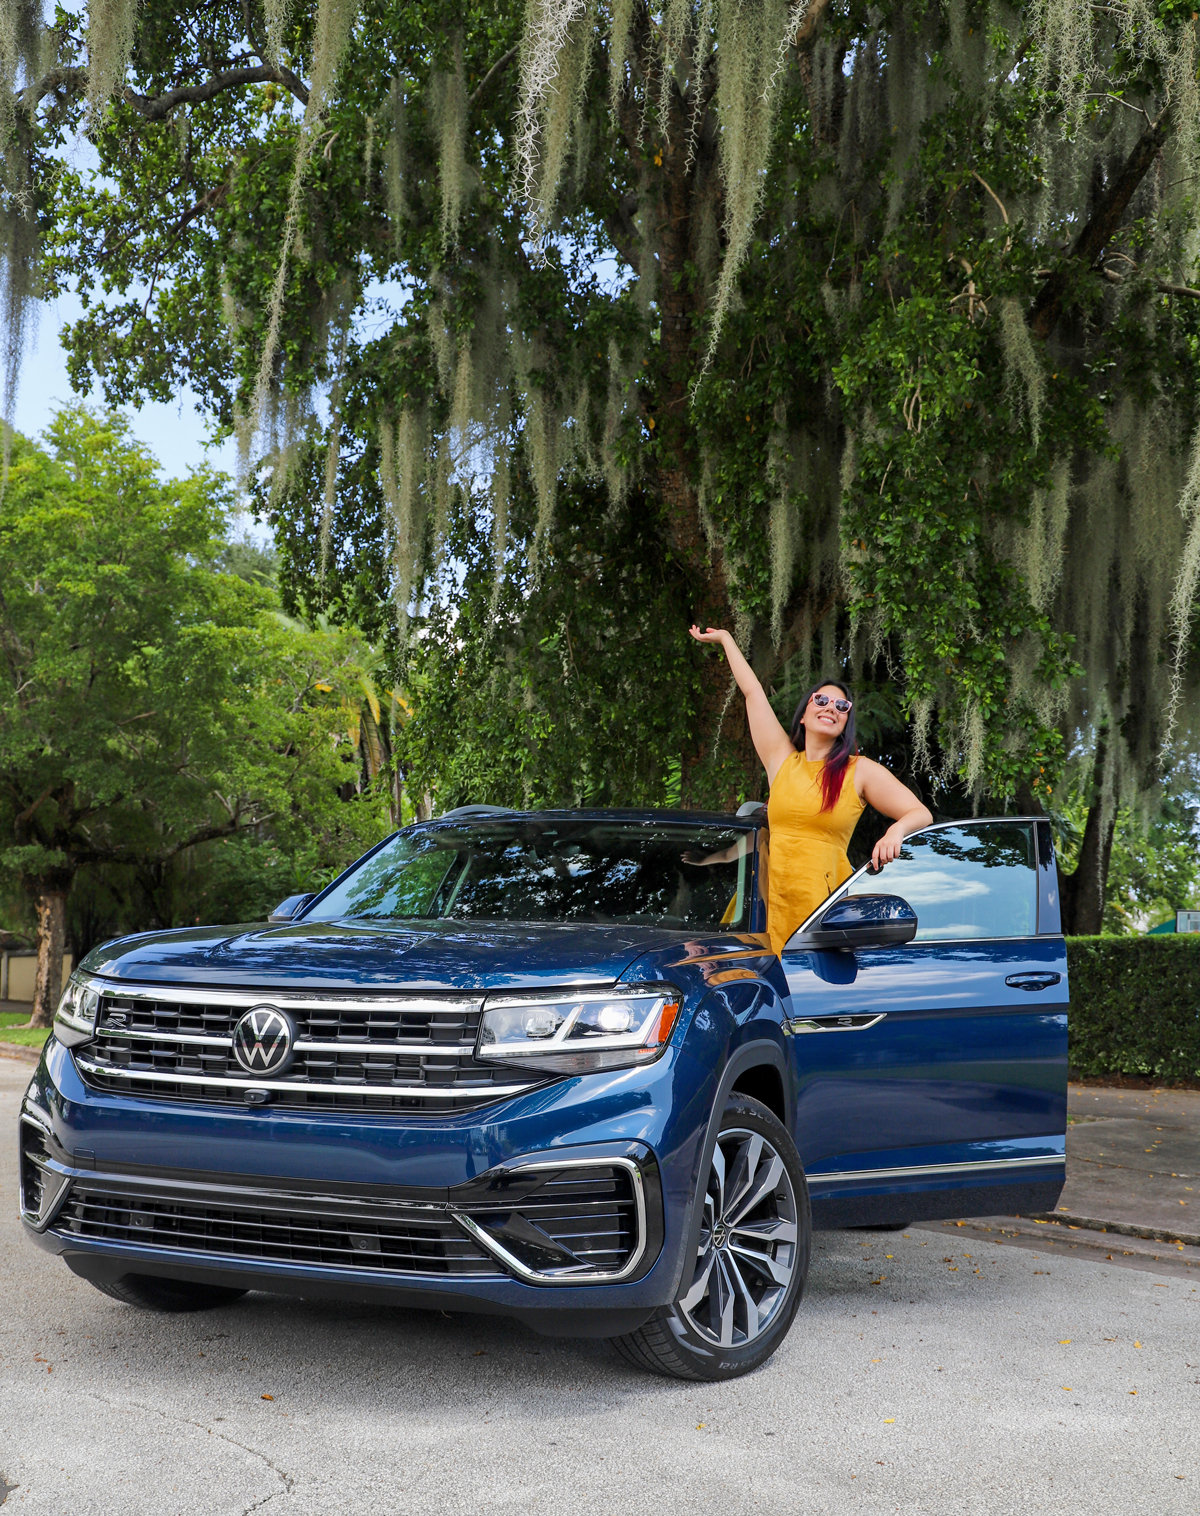 Fun Things To Do in Miami - Drive Around Coral Gables Douglas Entrance in VW Atlas SUV